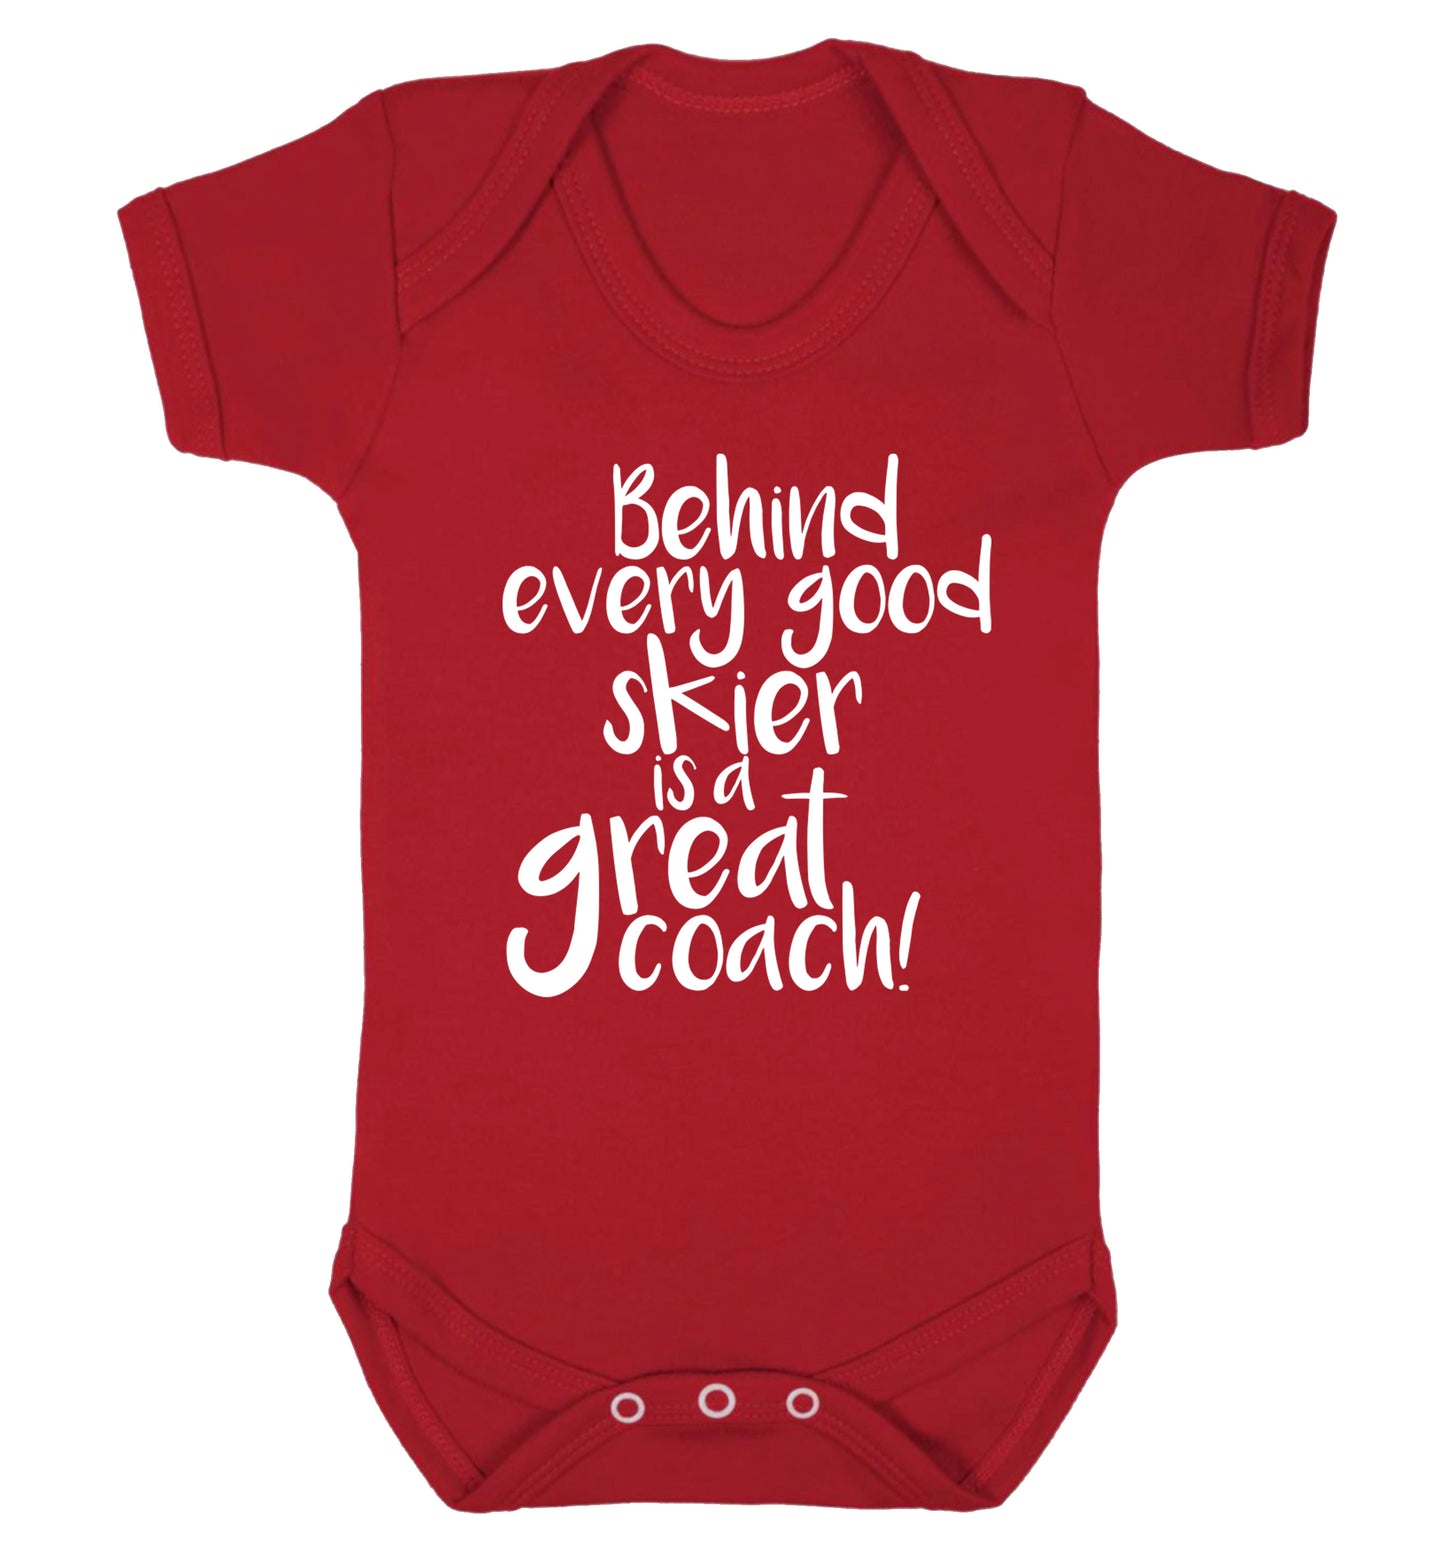 Behind every good skier is a great coach! Baby Vest red 18-24 months